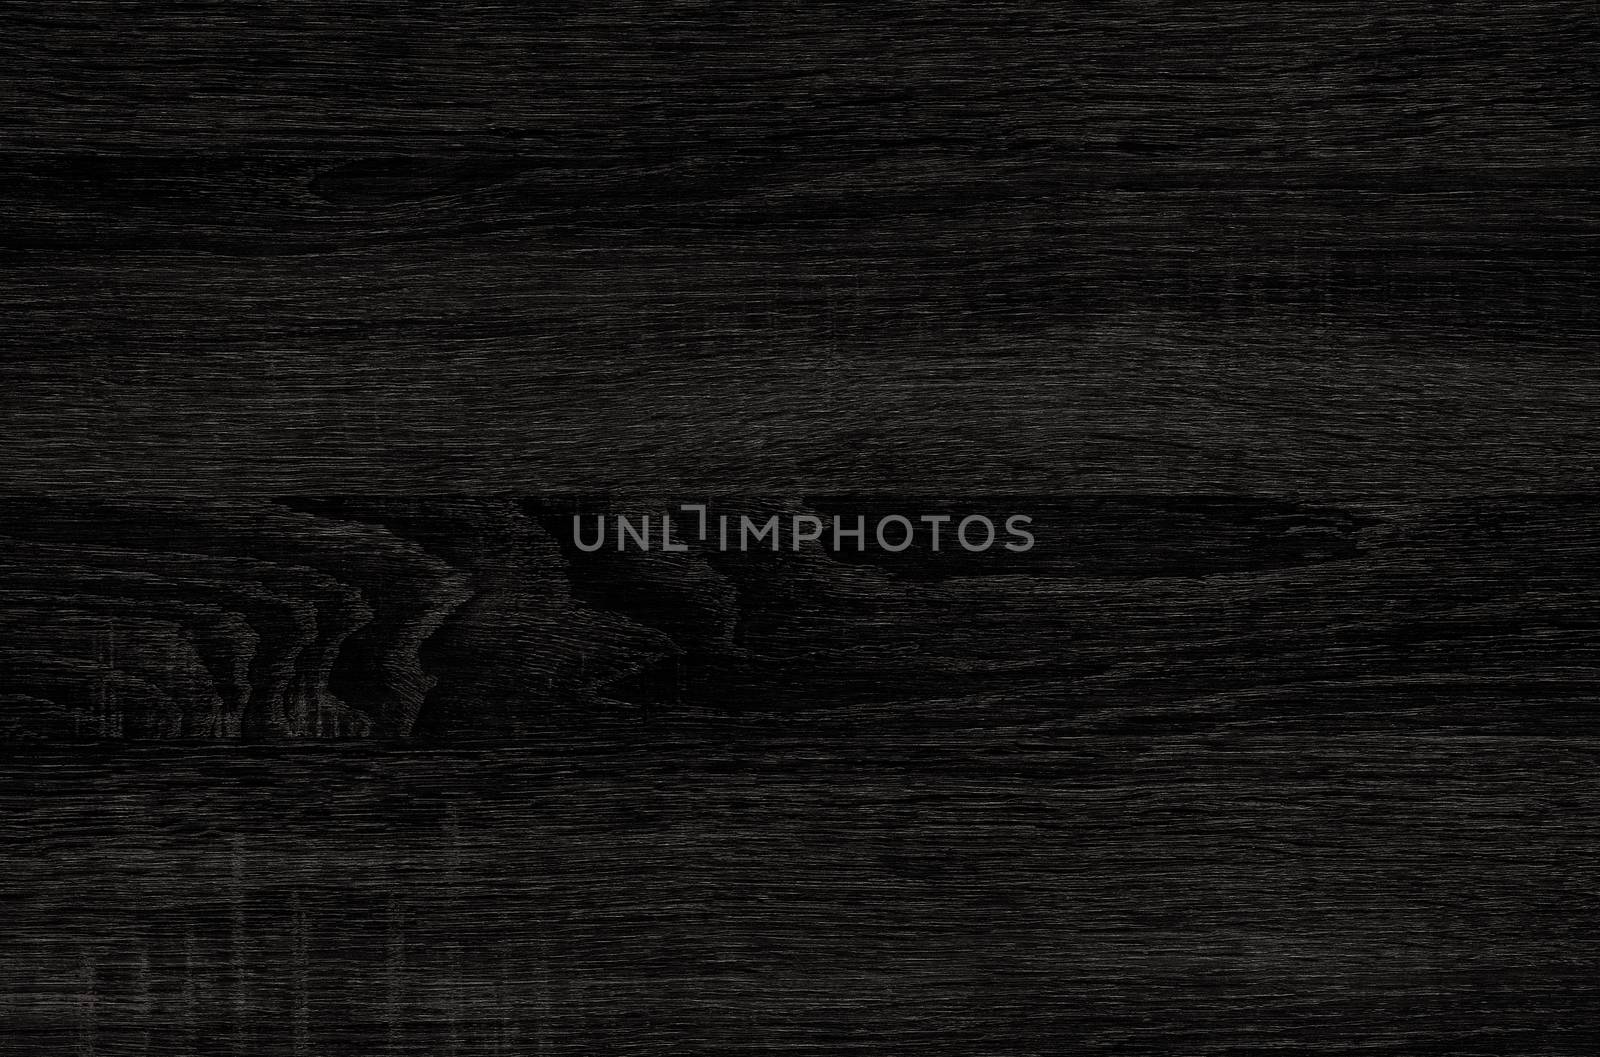 Black wood texture. background old panels. wooden texture